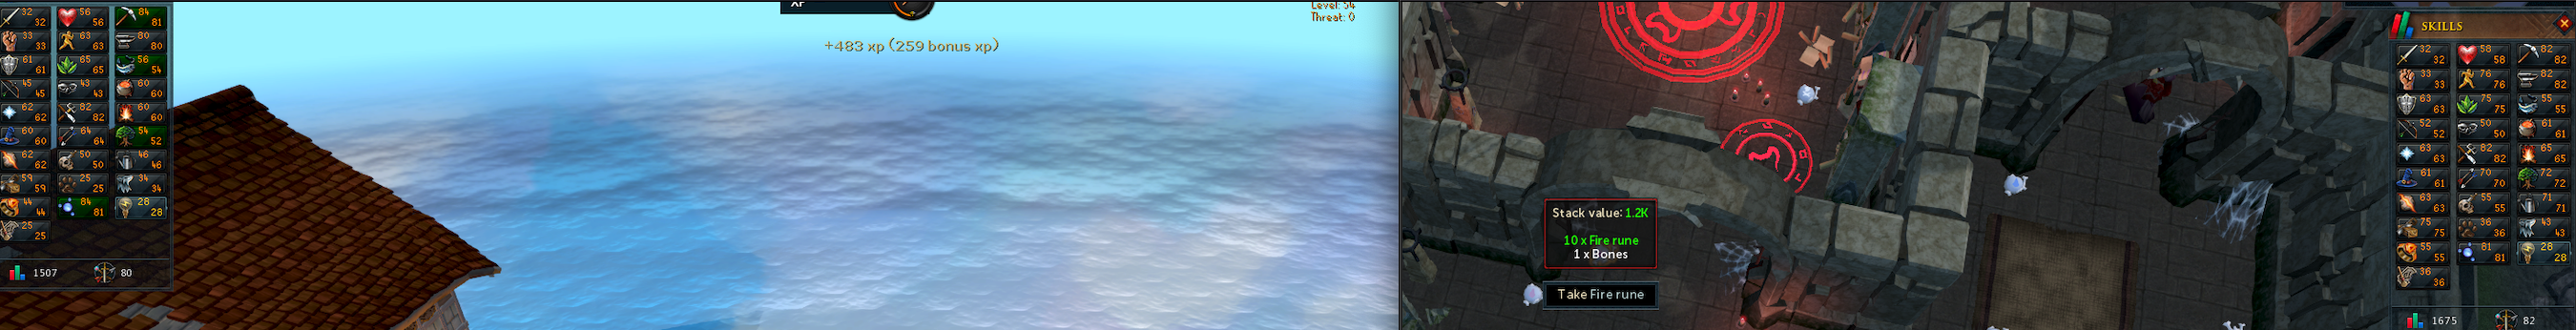 Two screenshots spliced together, showing my skilling progress over Double XP in RuneScape 3